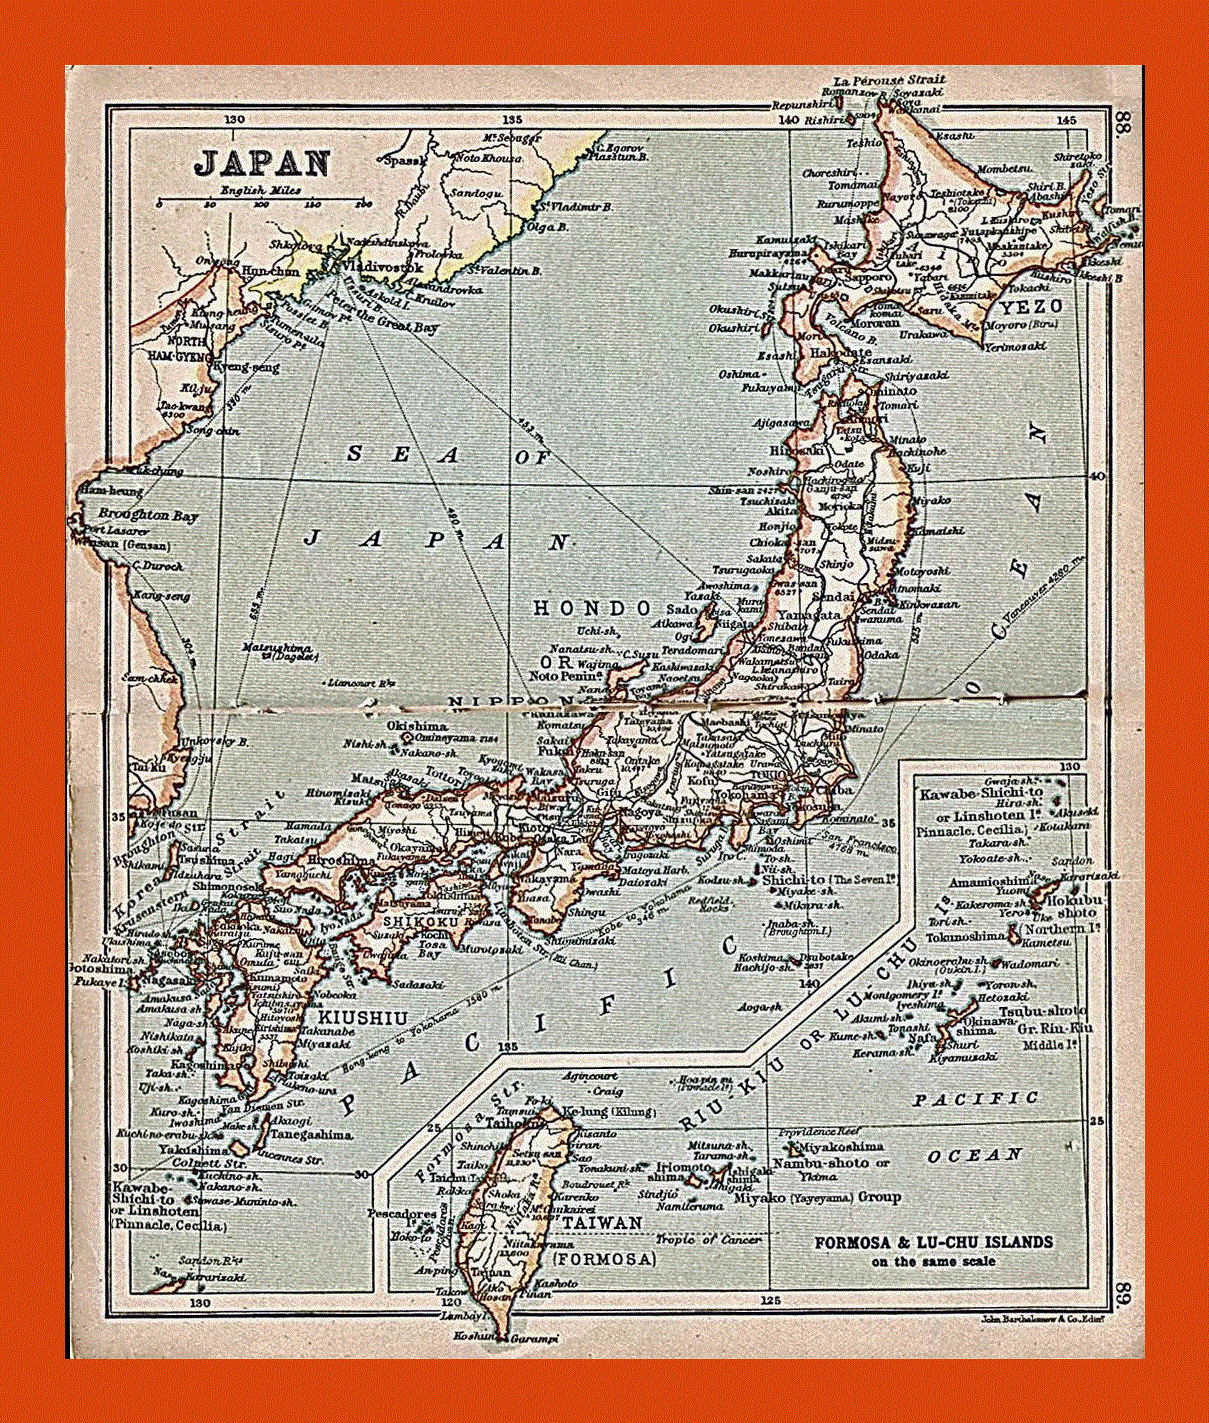 Old map of Japan - 1911